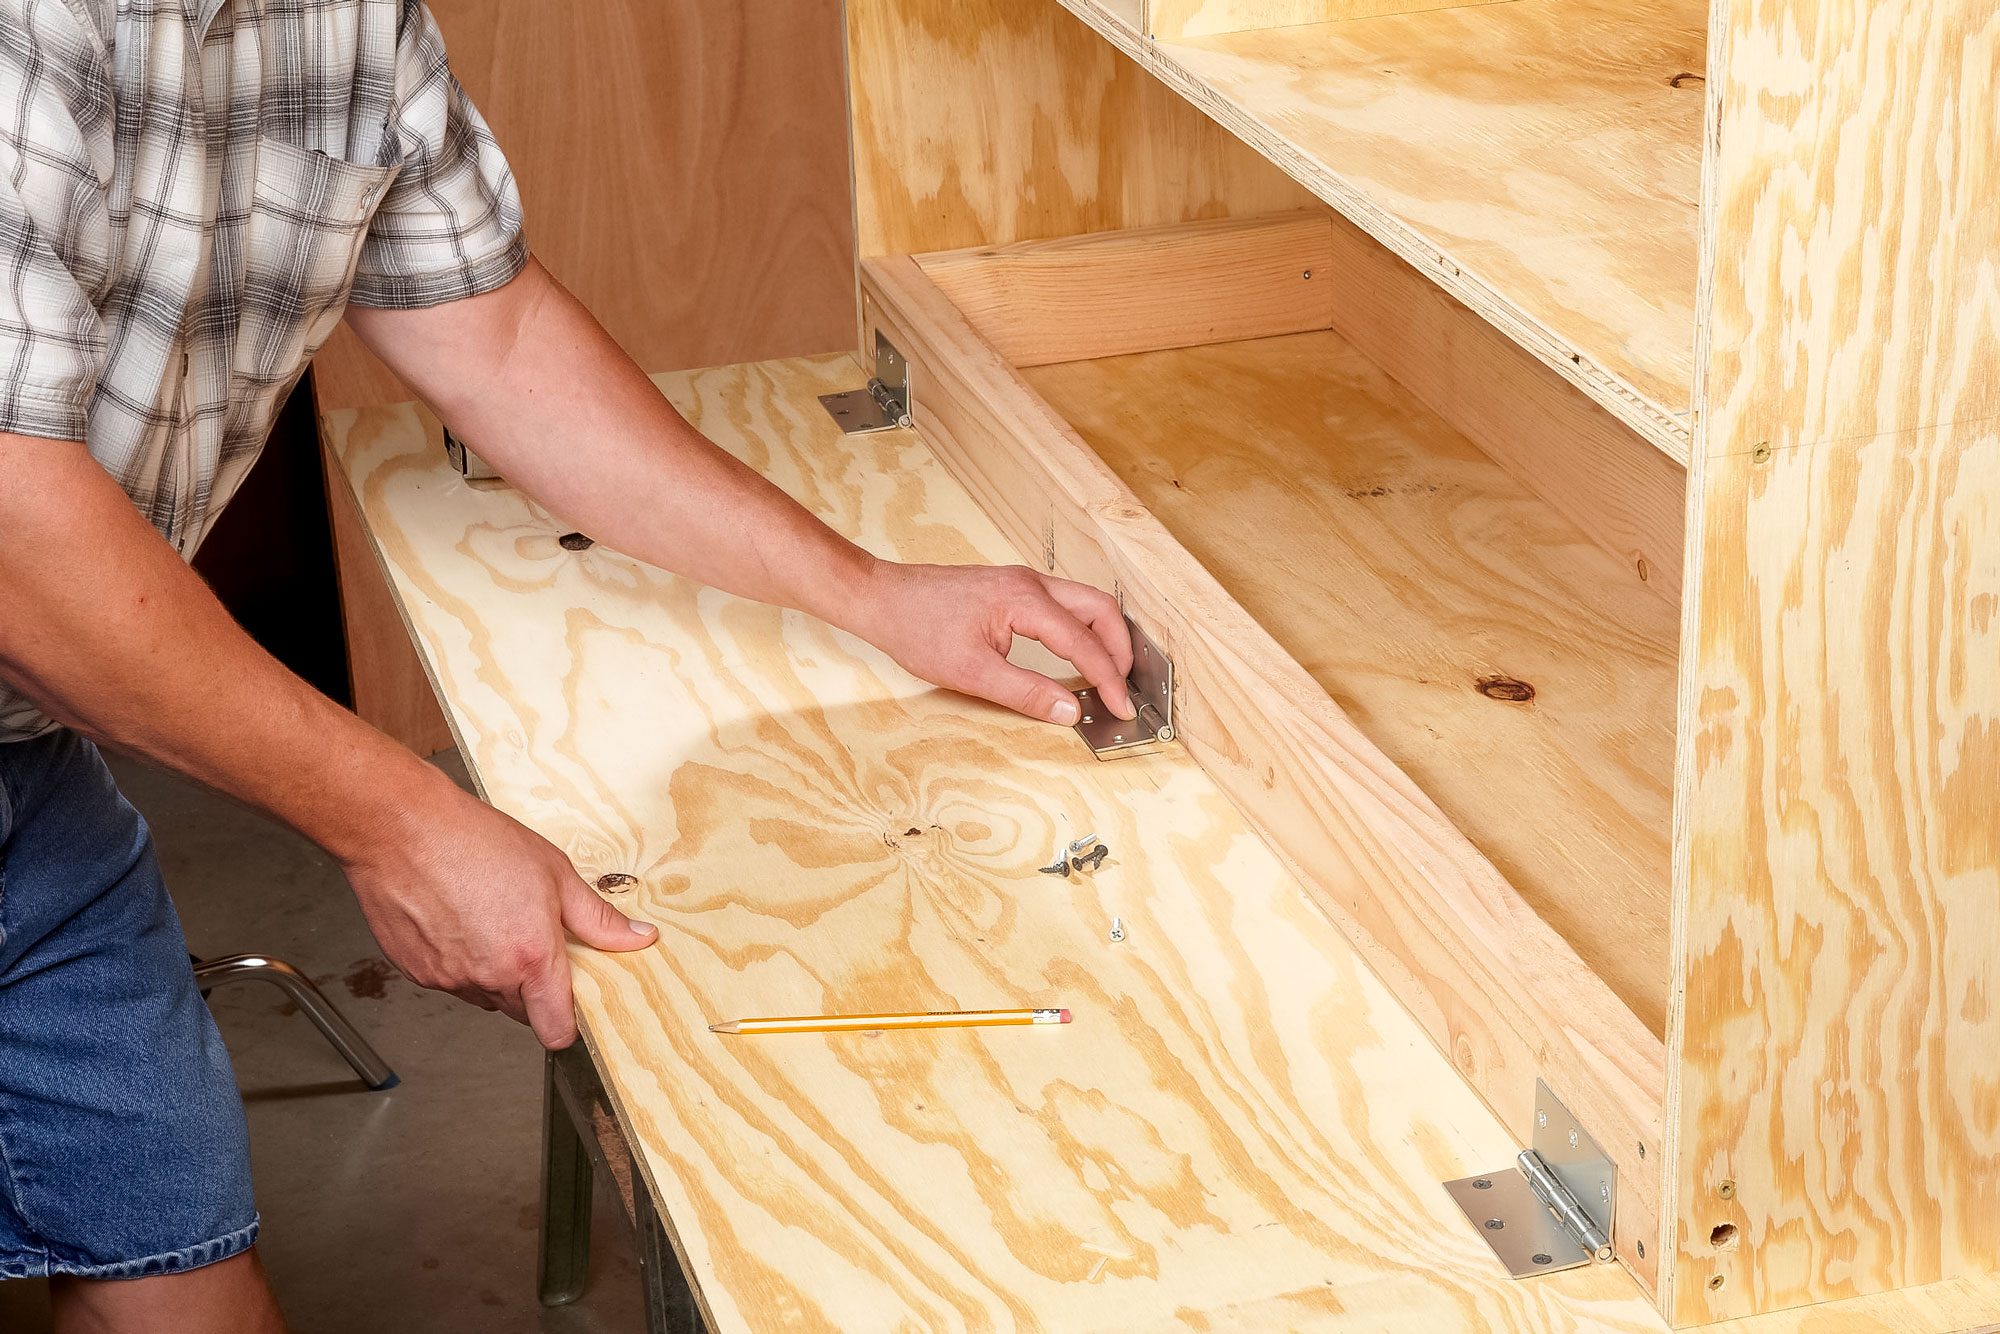 How To Build A Workbench For Small